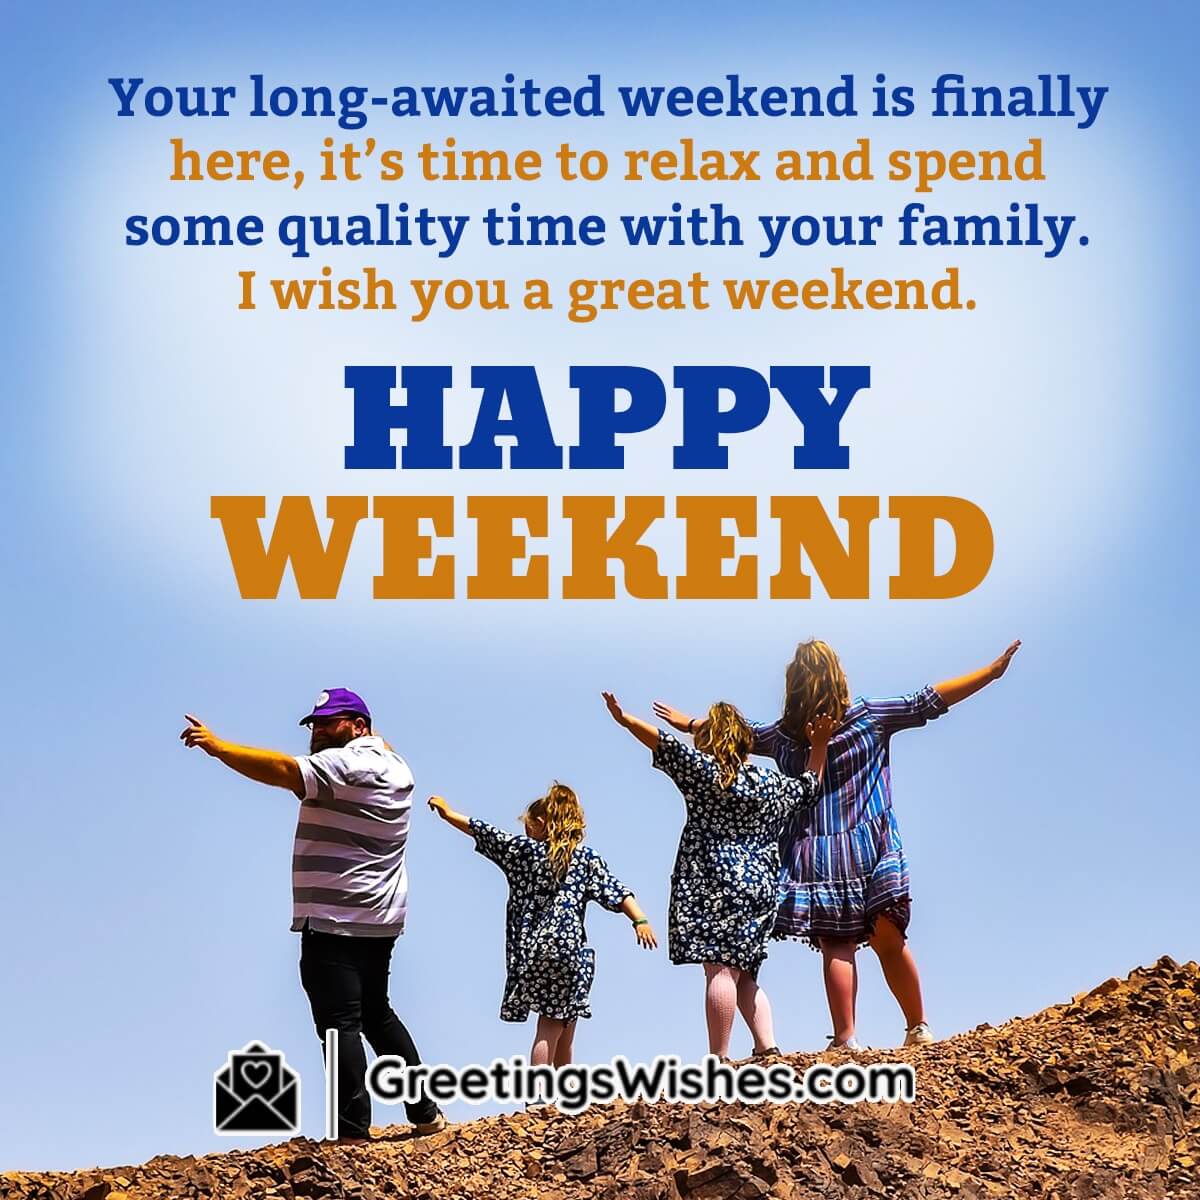 Great Weekend Wishes